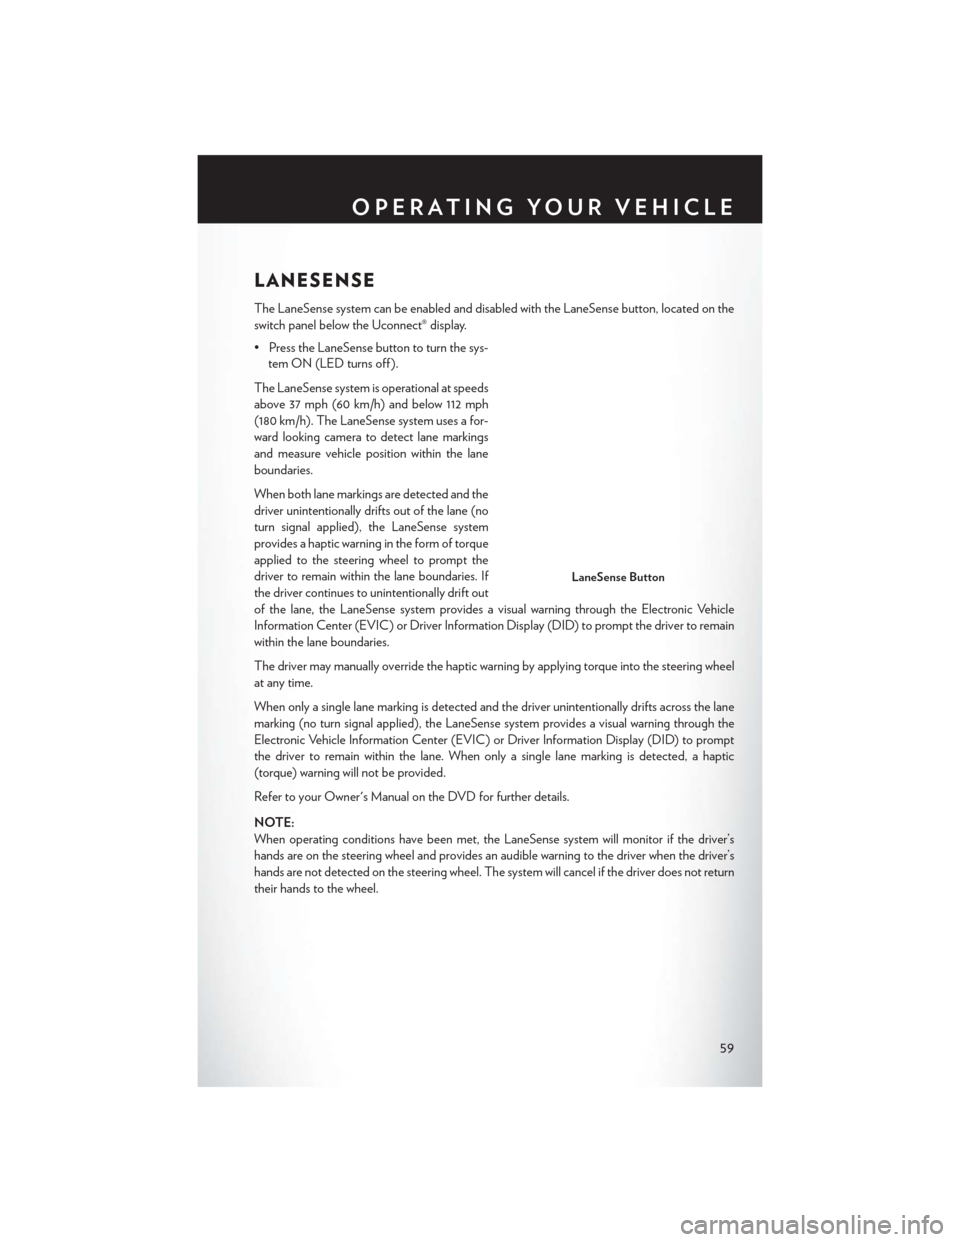 CHRYSLER 200 2015 2.G User Guide LANESENSE
The LaneSense system can be enabled and disabled with the LaneSense button, located on the
switch panel below the Uconnect® display.
• Press the LaneSense button to turn the sys-tem ON (L